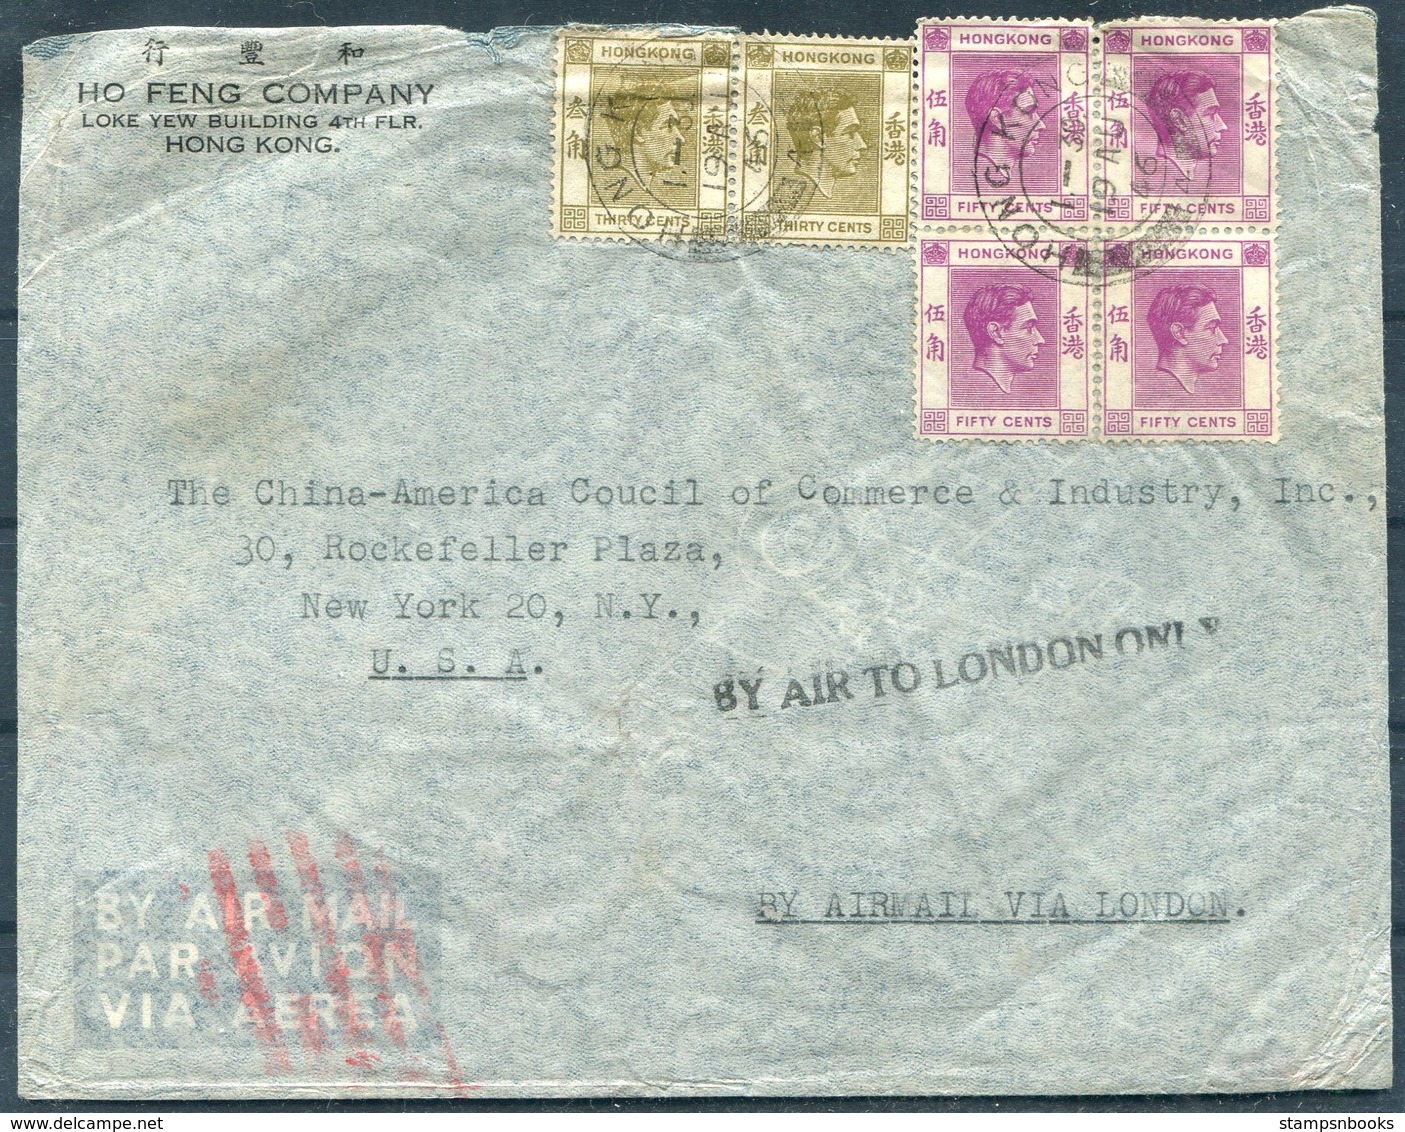 1946 Hong Kong $2.60 Rate Airmail Cover - The China America Council Of Commerce, New York USA. "BY AIR TO LONDON ONLY" - Storia Postale